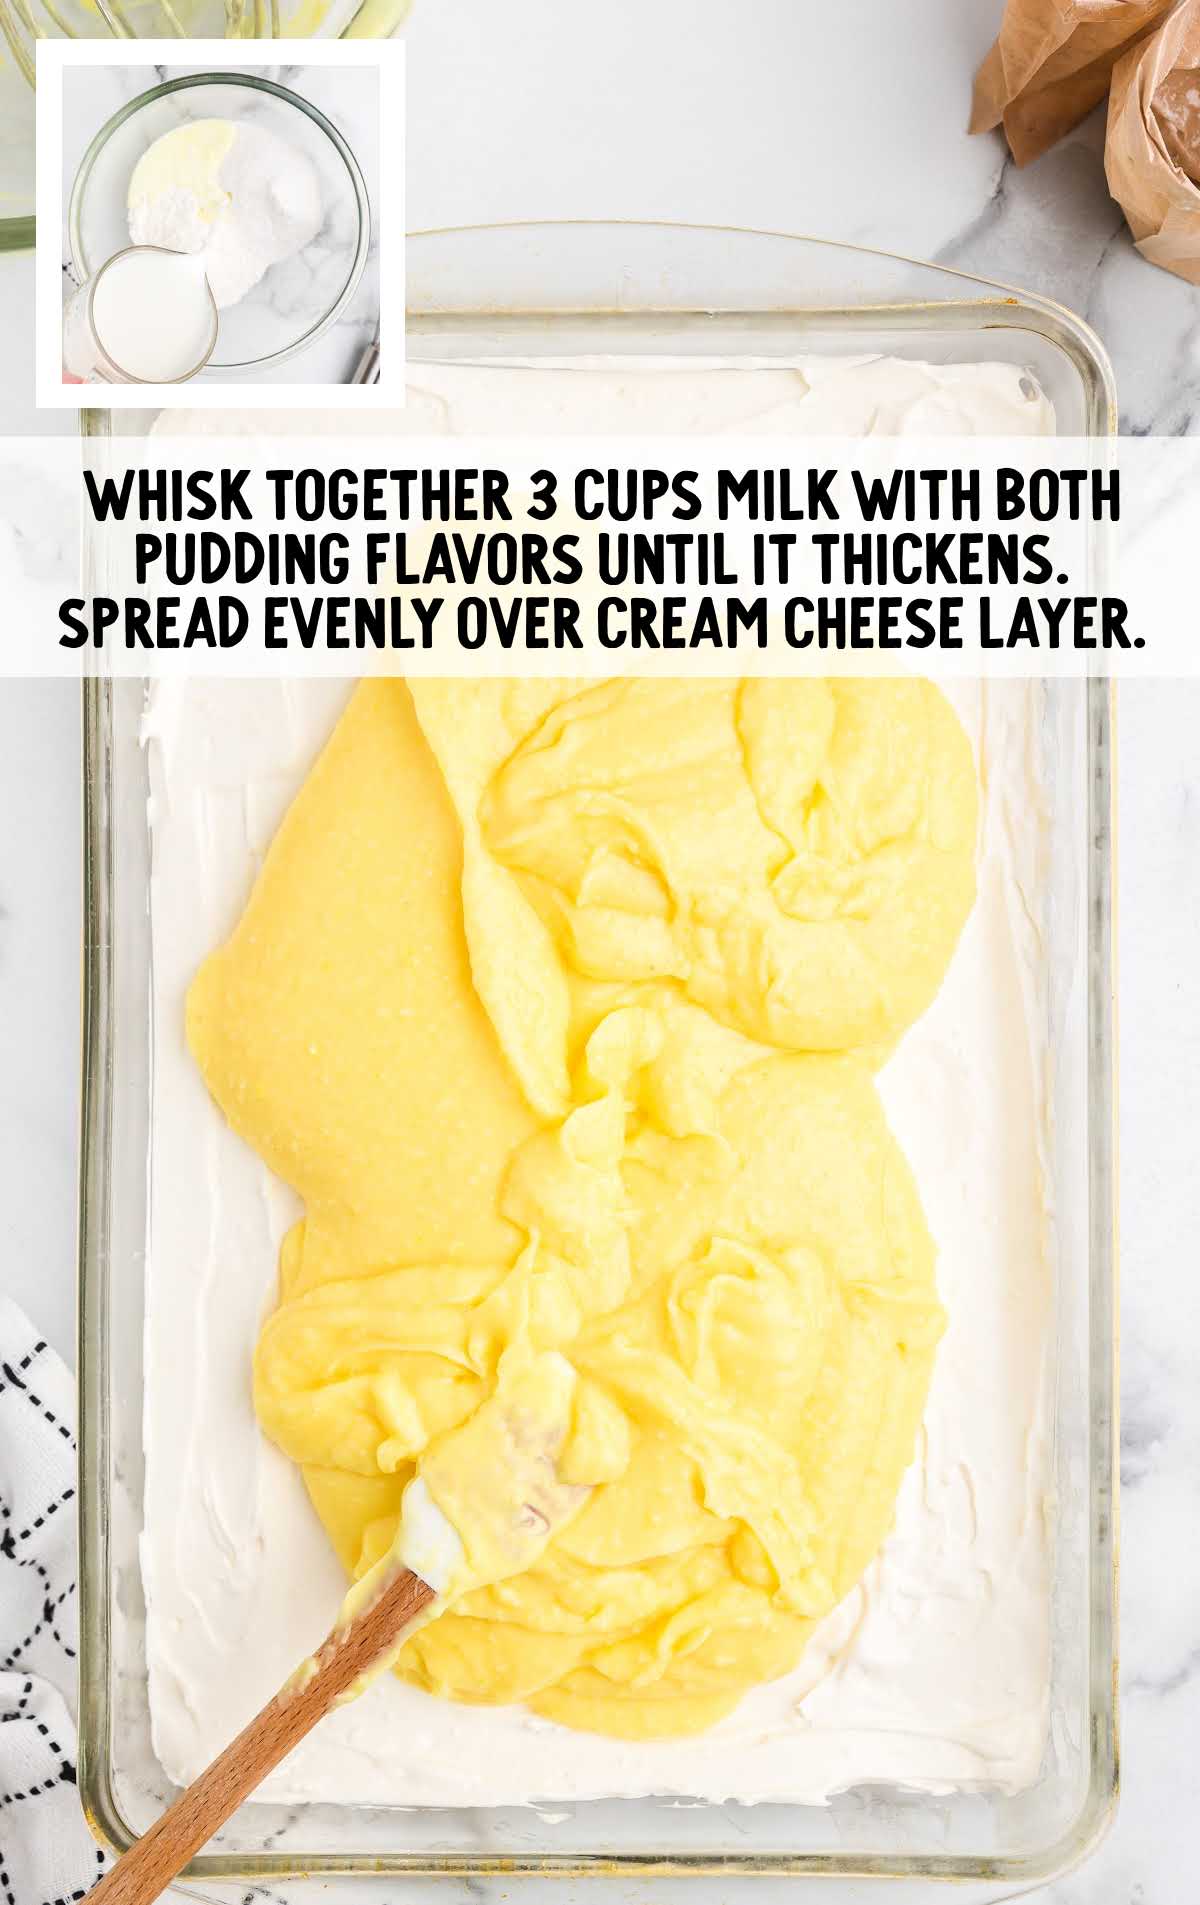 lemon ingredients combined in a bowl then spread on top of the cream cheese layer